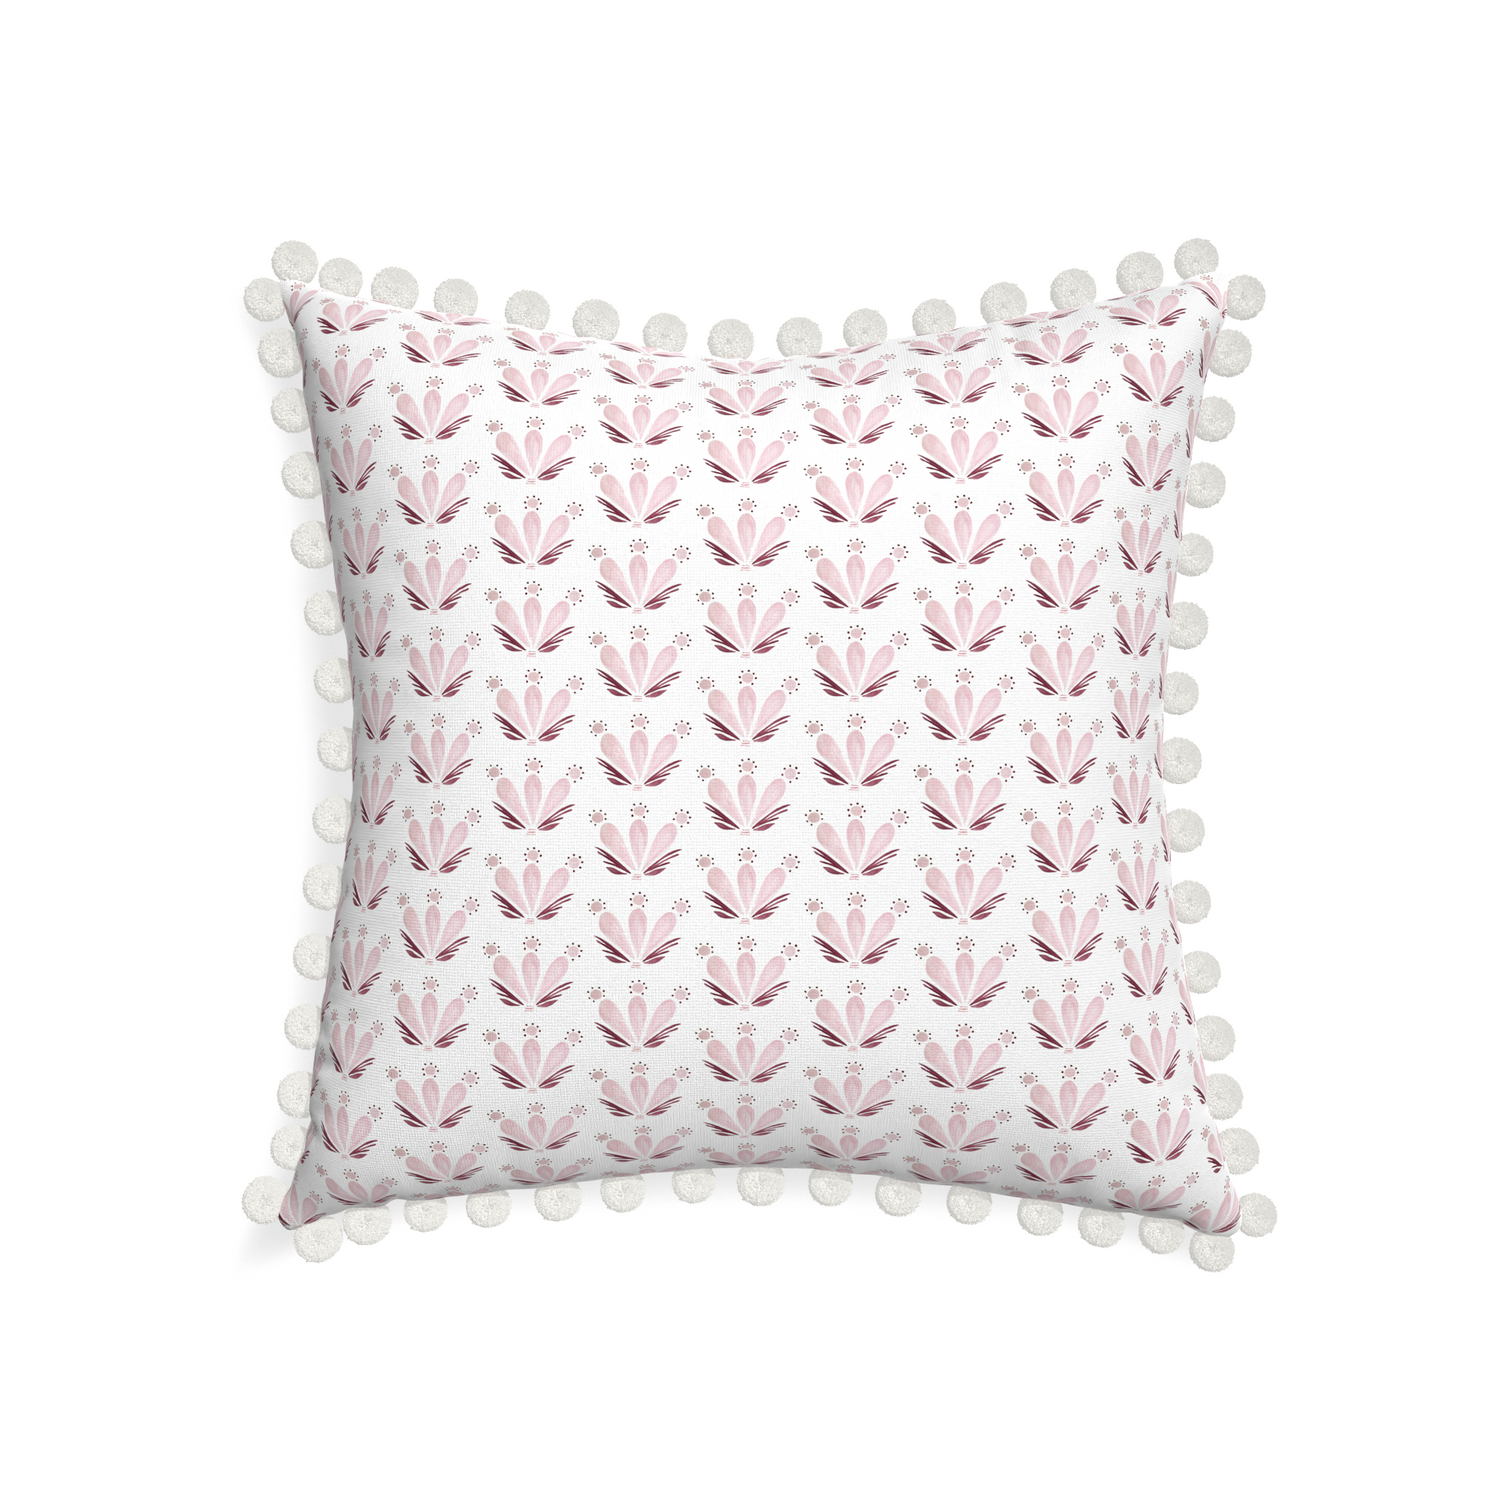 22-square serena pink custom pillow with snow pom pom on white background